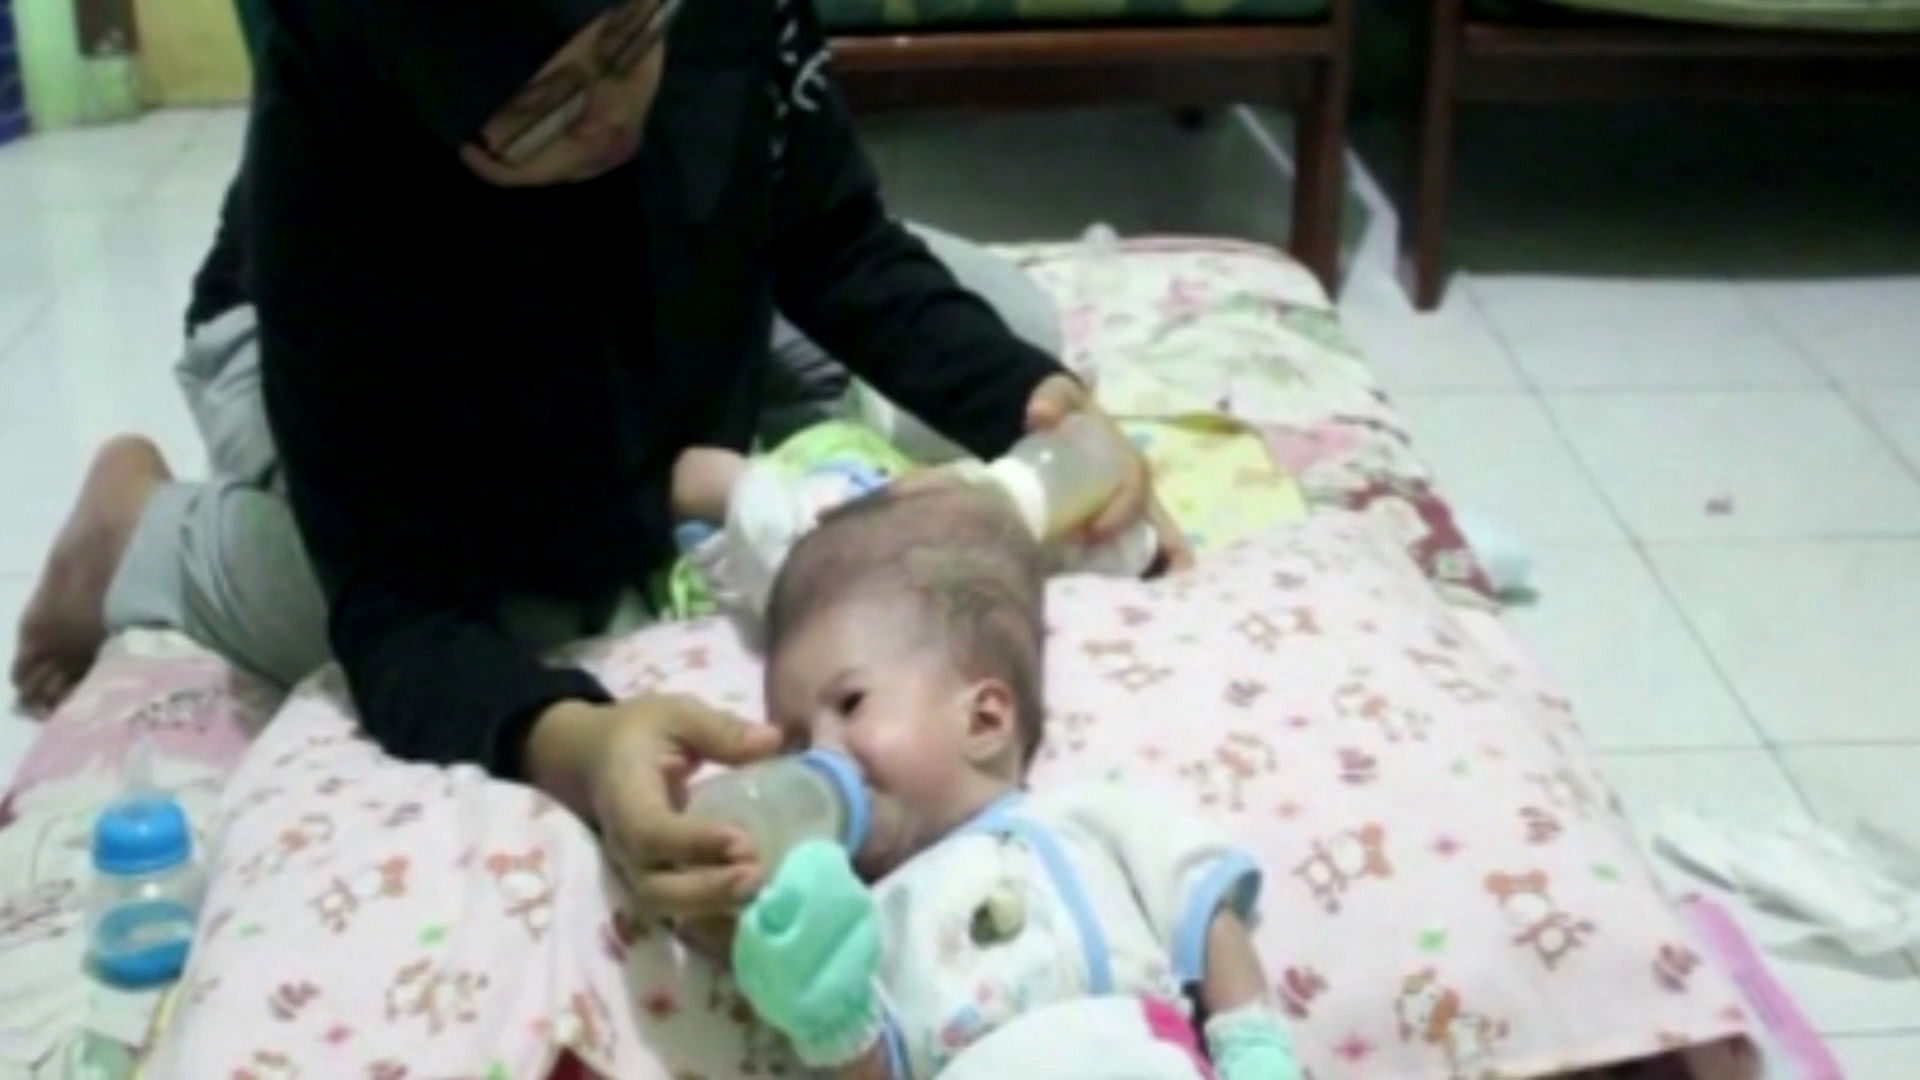 Four-month-old conjoined twins Nadira Alifa Putri and Nadiba Aisyah Putri were born on 21 January, 2016 at the Tanjungpinang Regional General Hospital in Indonesia. (Photo: AP/Caters News screengrab)